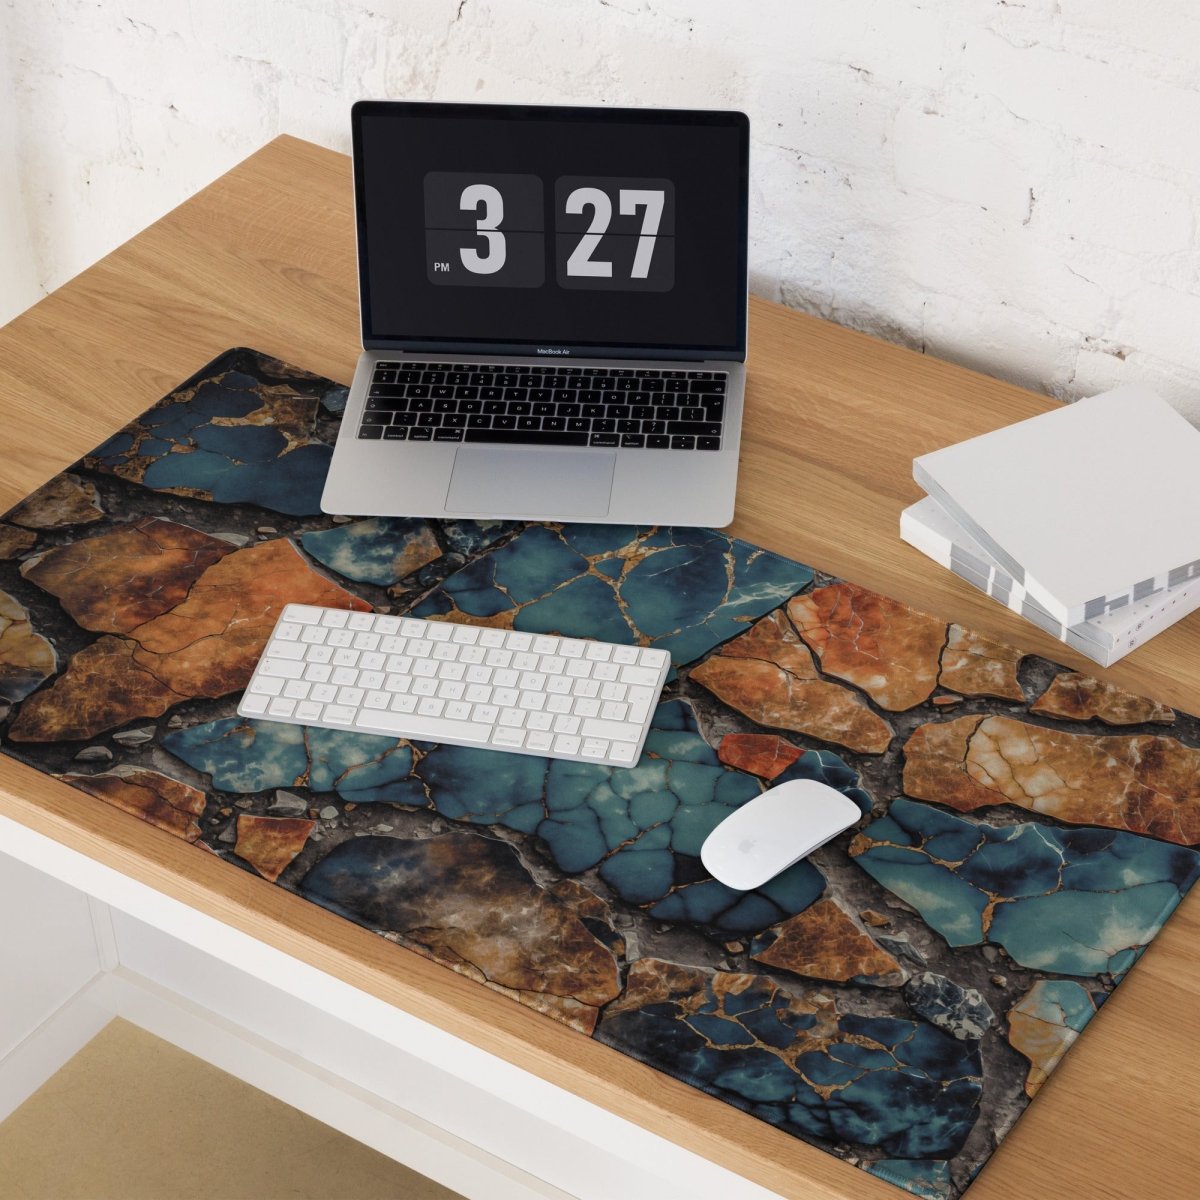 Geode spectrum - Gaming mouse pad - Ever colorful